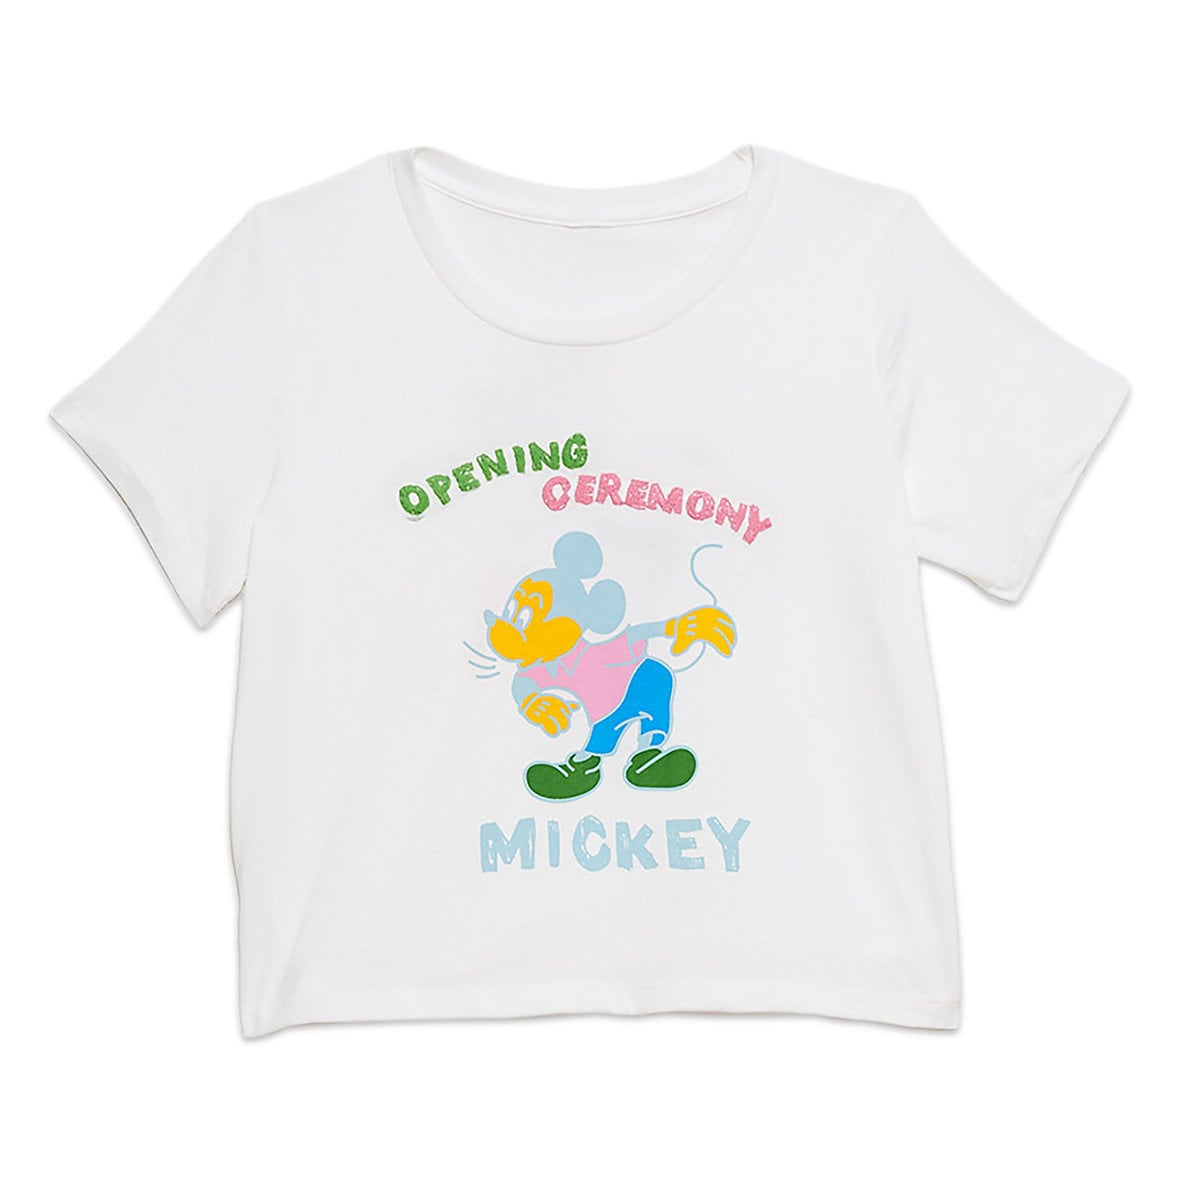 Disney Mickey Mouse Cropped T Shirt For Women By Opening Ceremony Disney But Make It Fashion See Every Look From Opening Ceremony S Disney Collaboration Popsugar Fashion Photo 46